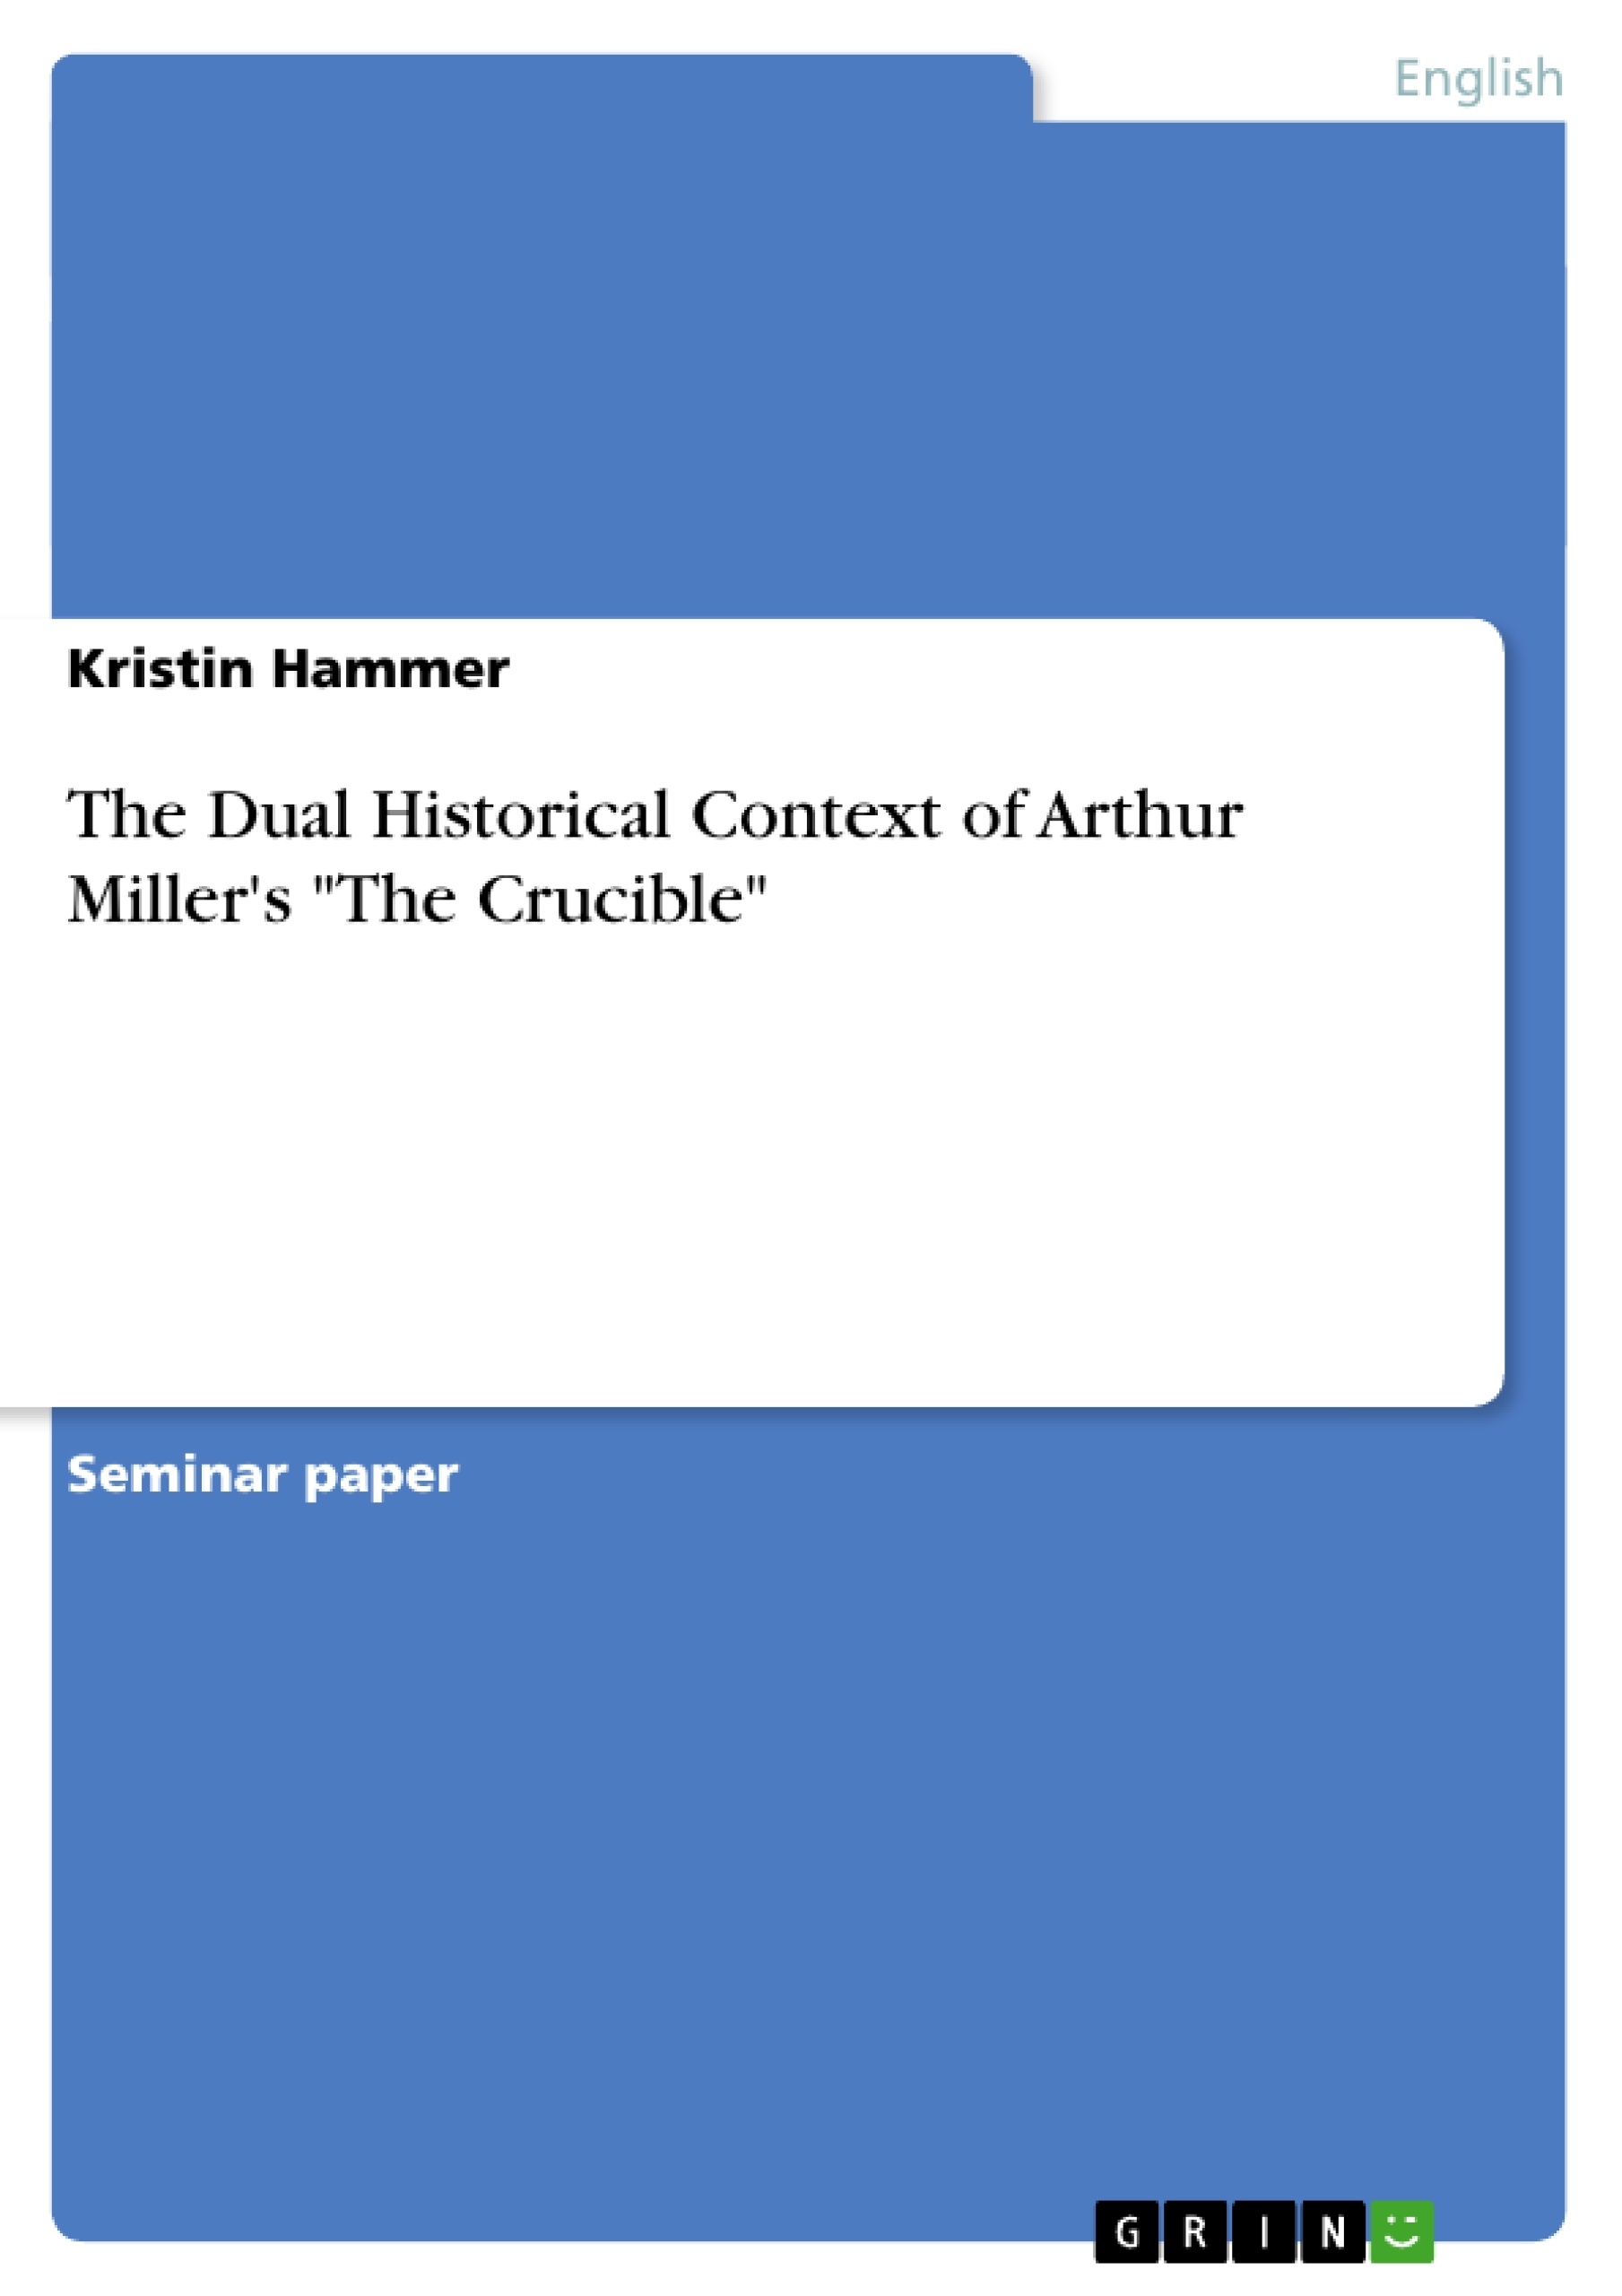 Title: The Dual Historical Context of Arthur Miller's "The Crucible"